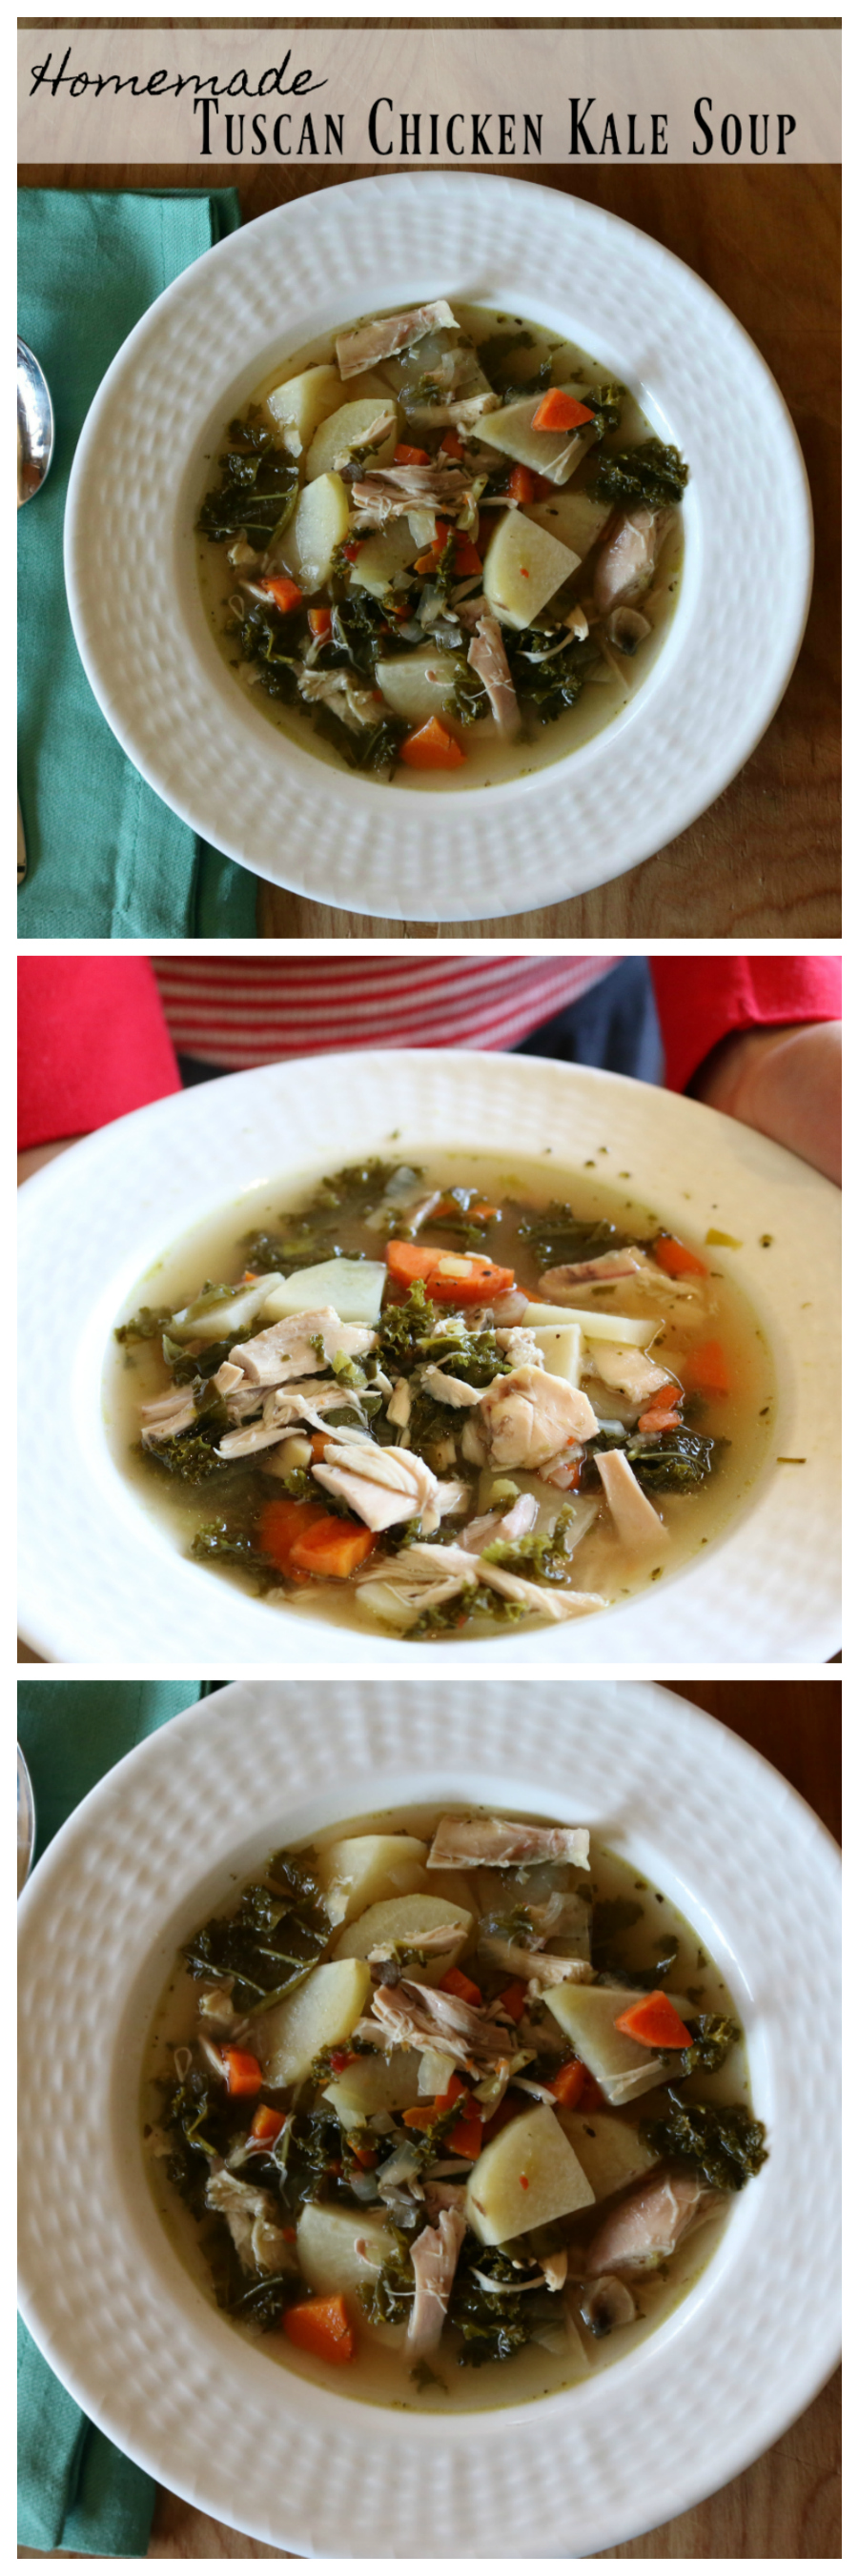 Easy Homemade Tuscan Chicken Kale Soup Recipe by CeceliasGoodStuff.com | Good Food for Good People